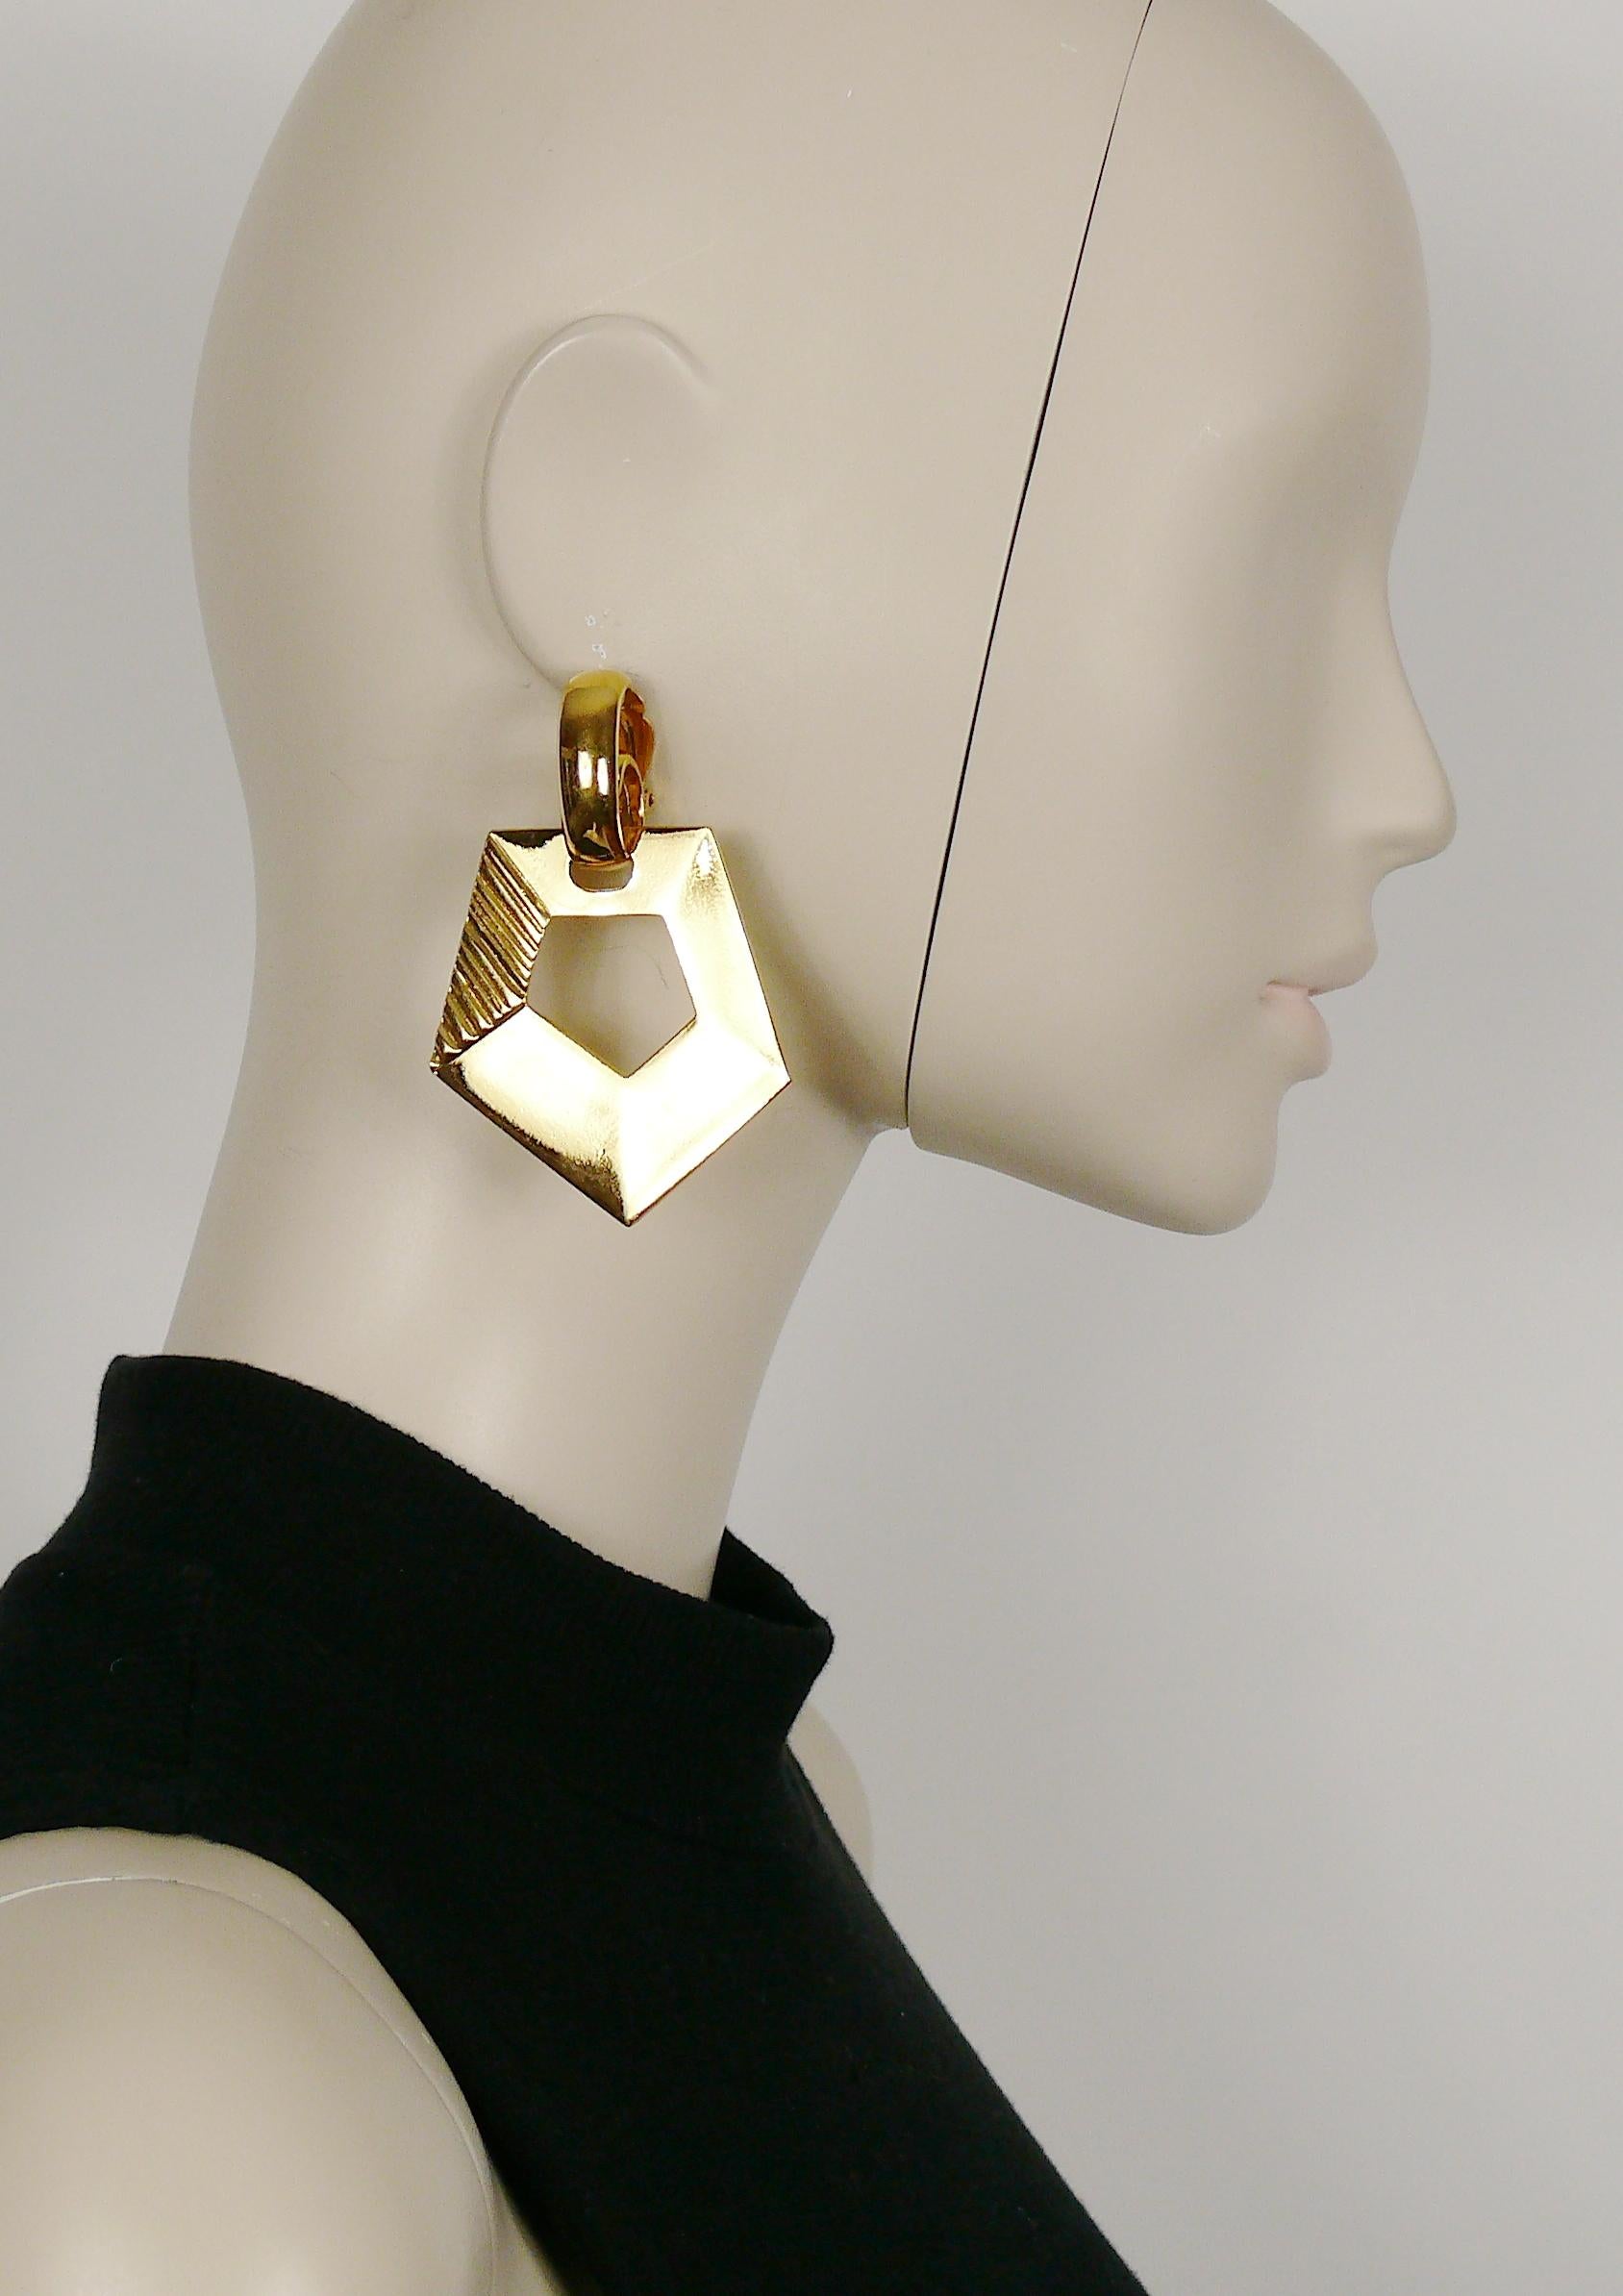 YVES SAINT LAURENT vintage massive gold toned dangling earrings (clip-on) featuring a geometric design.

Embossed YSL Made in France.

Indicative measurements : height approx. 7.5 cm (2.95 inches) / max. width approx. 5.1 cm (2.01 inches).

Comes